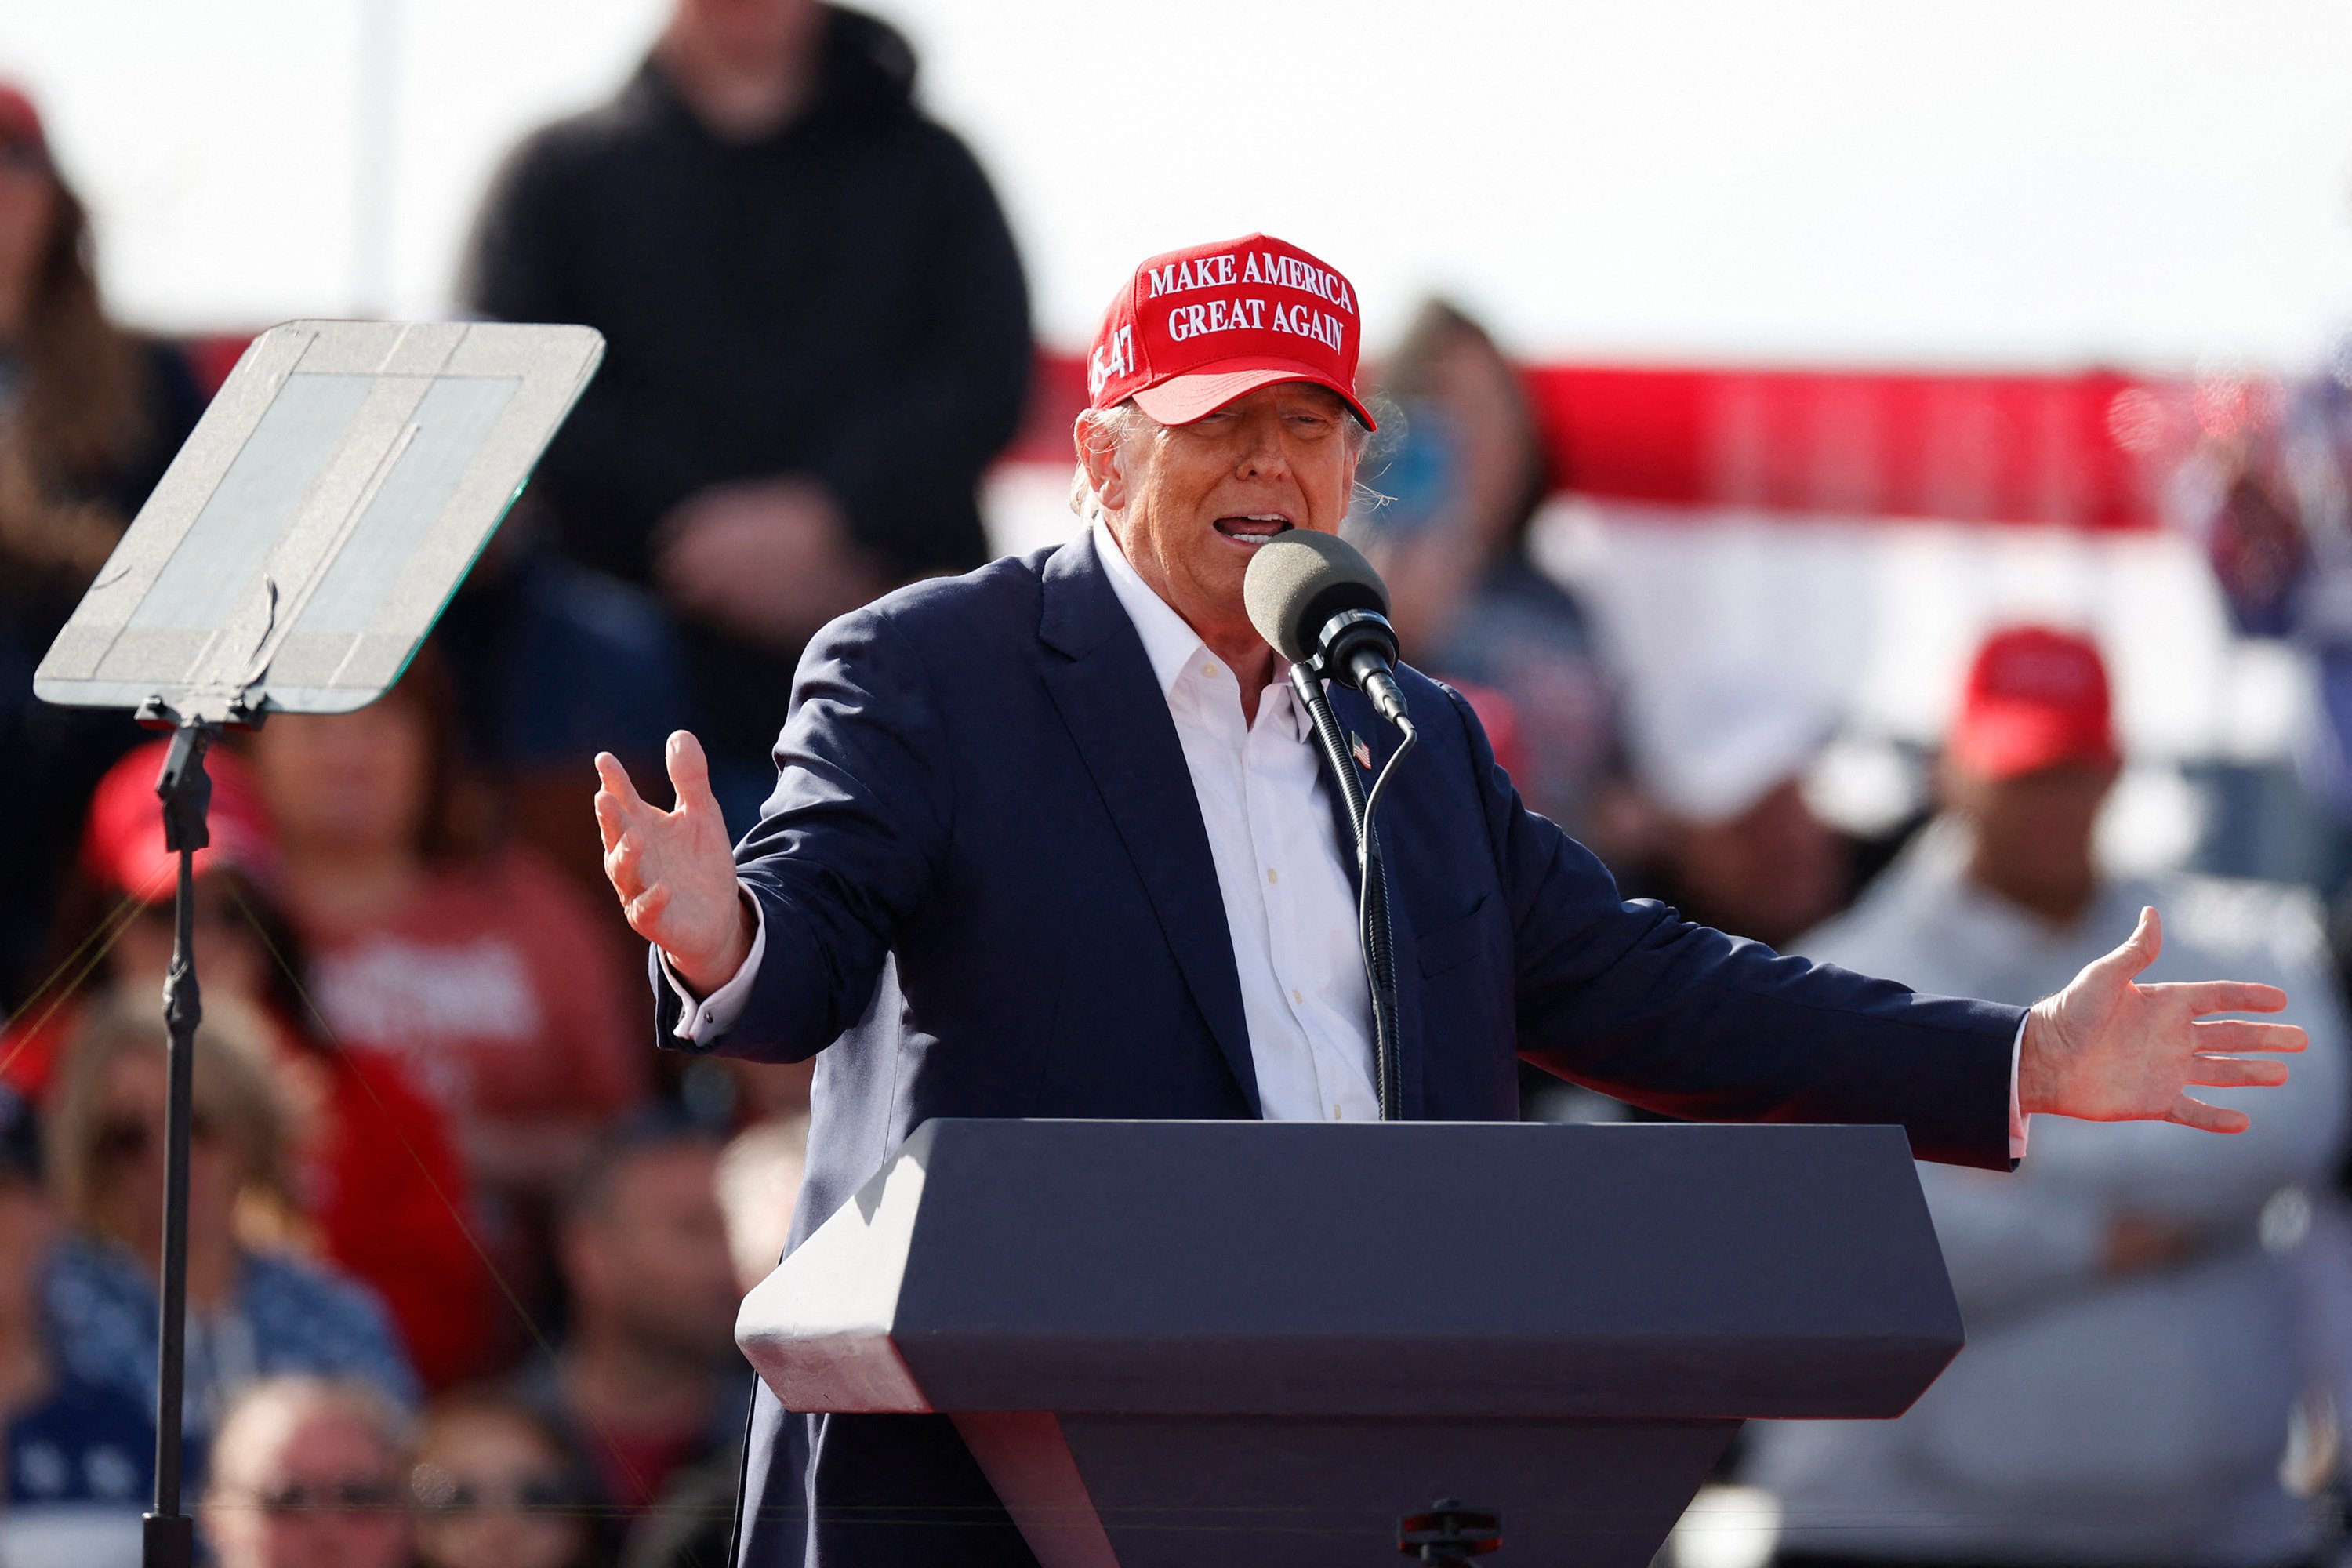 Former President and Republican presidential candidate Donald Trump speaks during a campaign rally in Vandalia, Ohio, on March 16, 2024. Photo: TNS